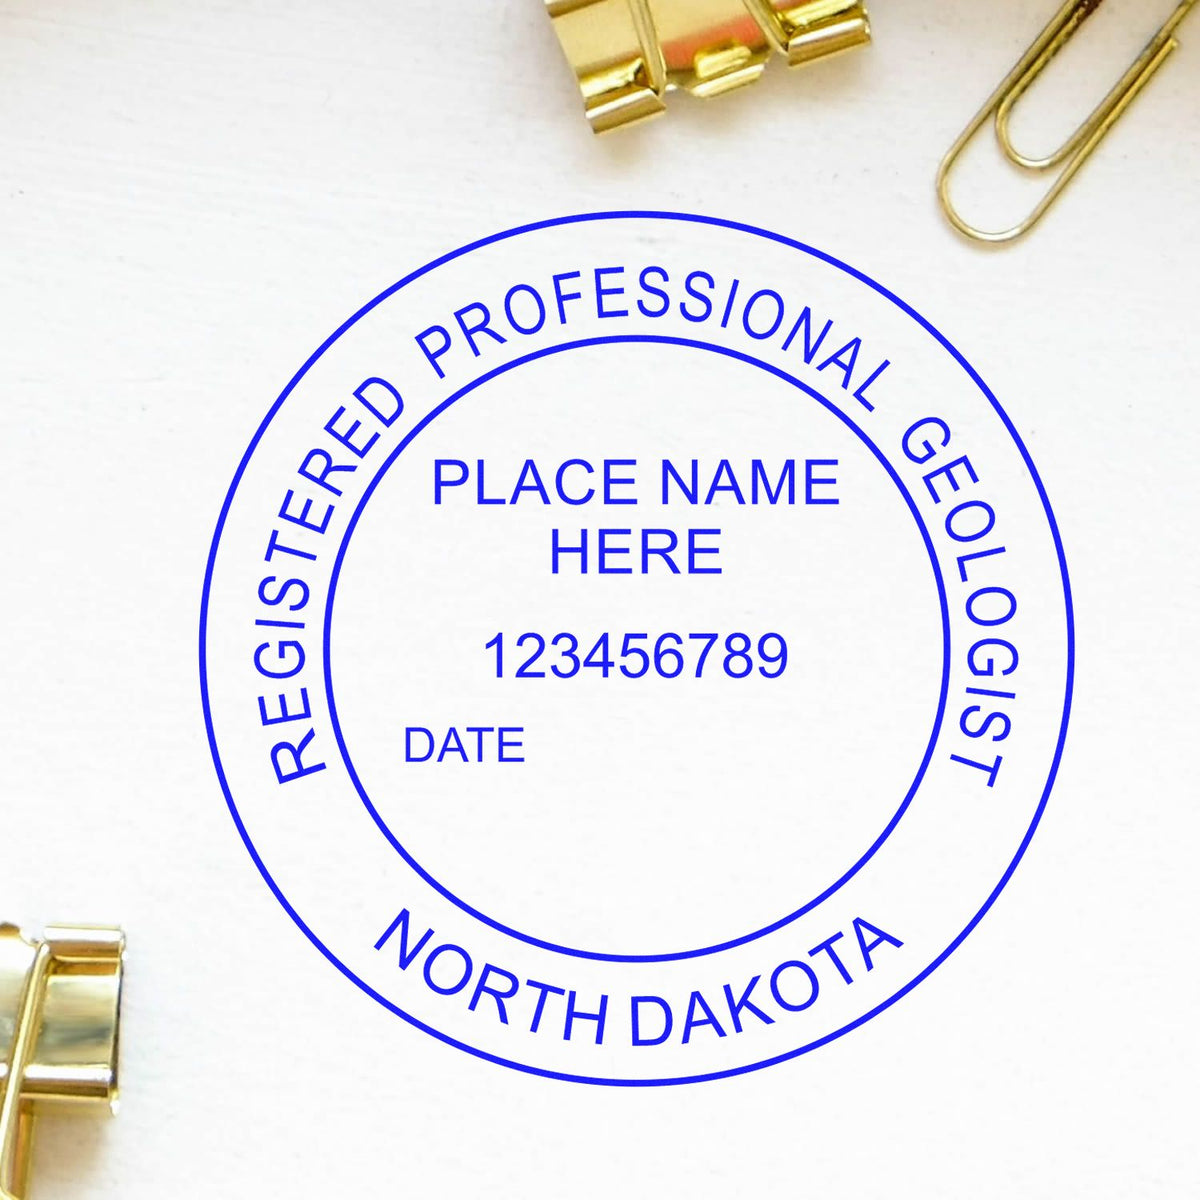 An alternative view of the Digital North Dakota Geologist Stamp, Electronic Seal for North Dakota Geologist stamped on a sheet of paper showing the image in use